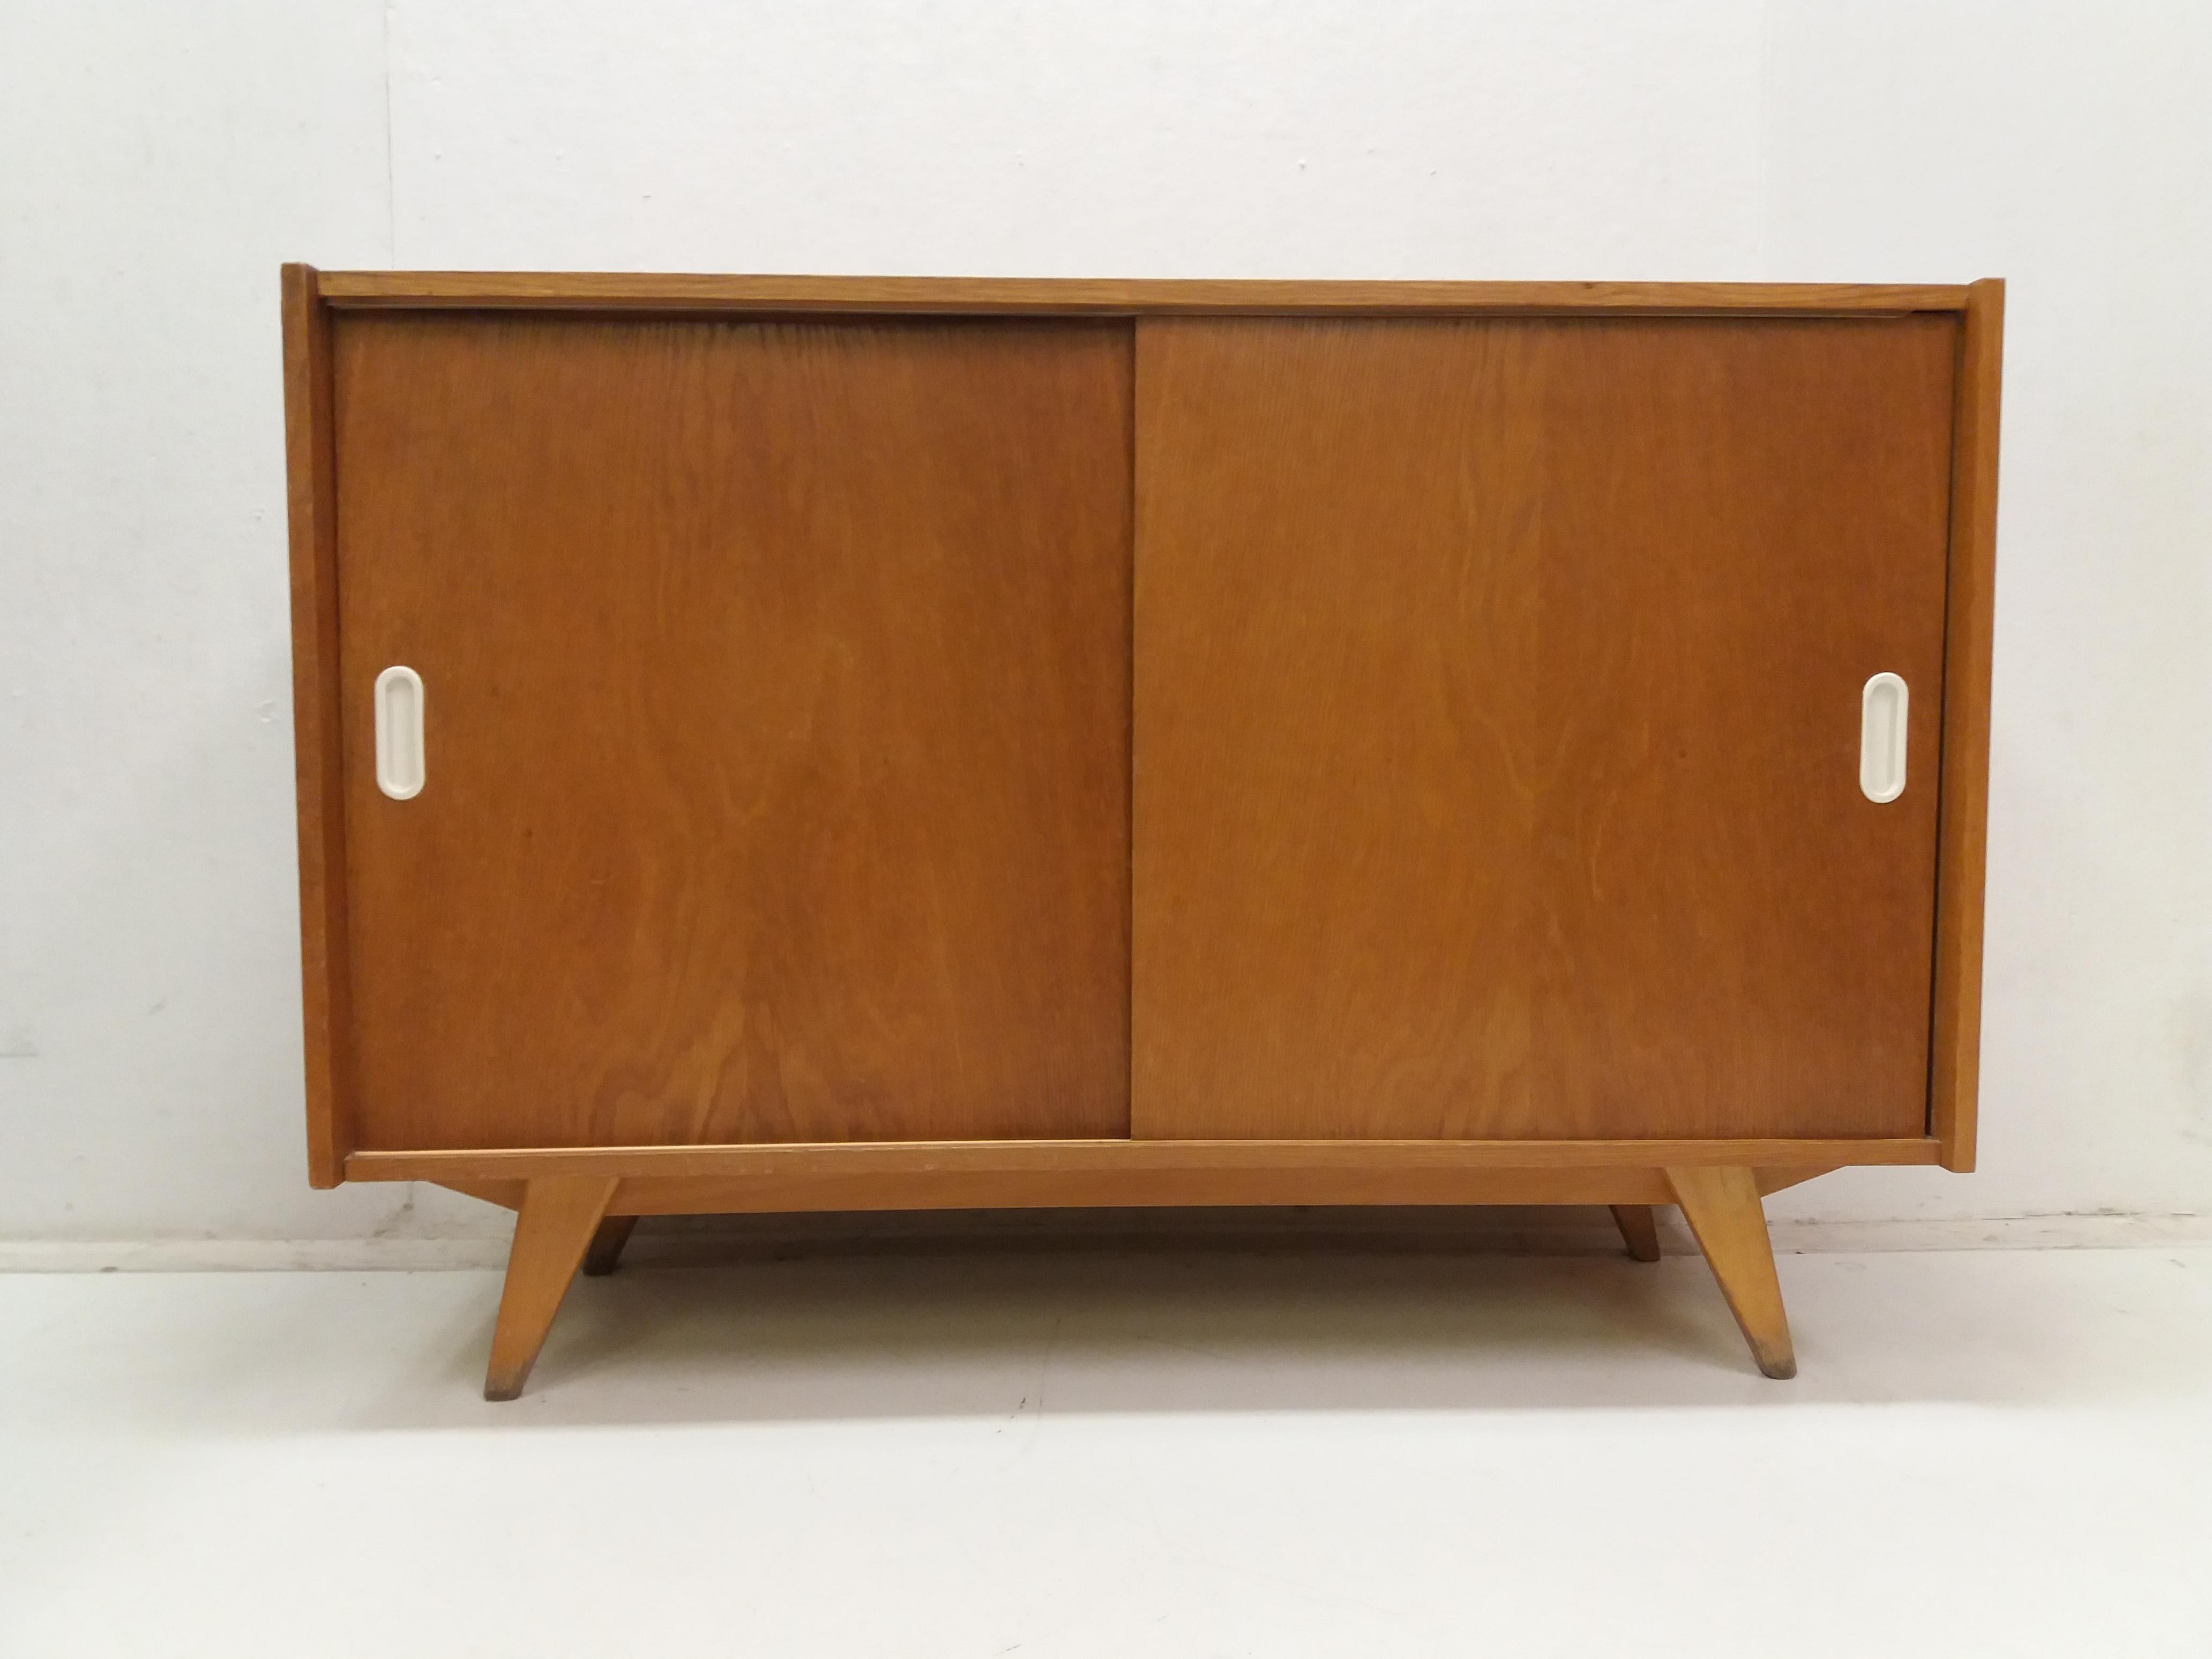 - Wooden veneered chest of drawers-veneer bub with sliding doors
- original very well preserved condition. 
- Design by Jirí Jiroutek 1958, production Interior Prague Czechoslovakia.
   